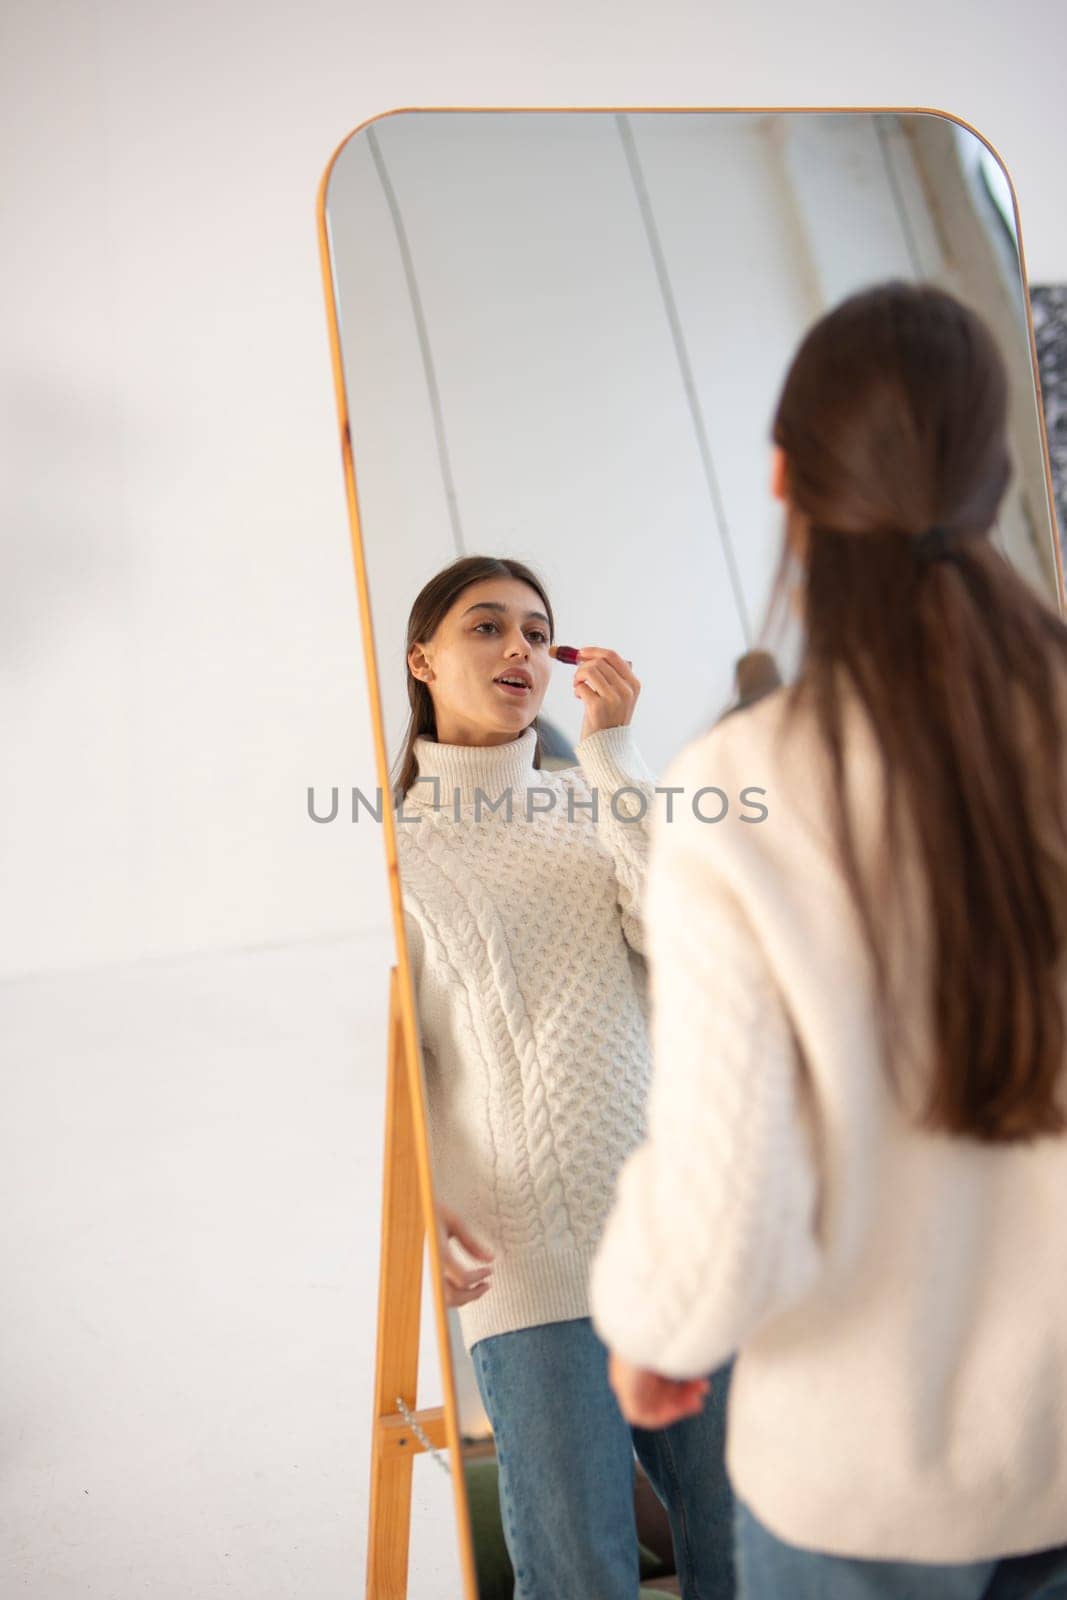 With Christmas cheer around, a stunning young girl works on her makeup in front of the mirror. High quality photo